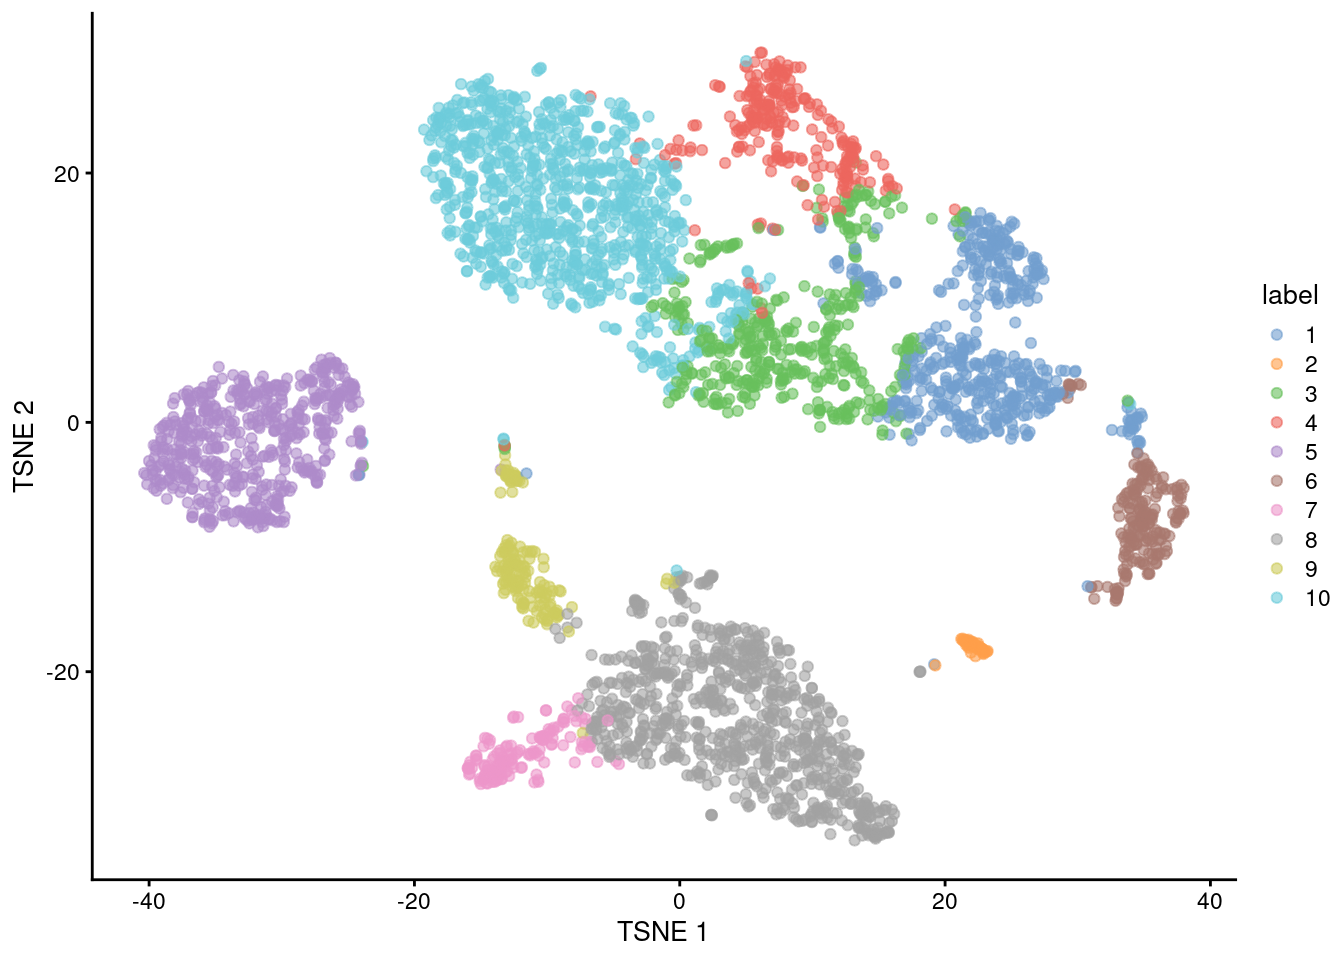 $t$-SNE plot of the 10X PBMC dataset, where each point represents a cell and is coloured according to the identity of the assigned cluster from $k$-means clustering.